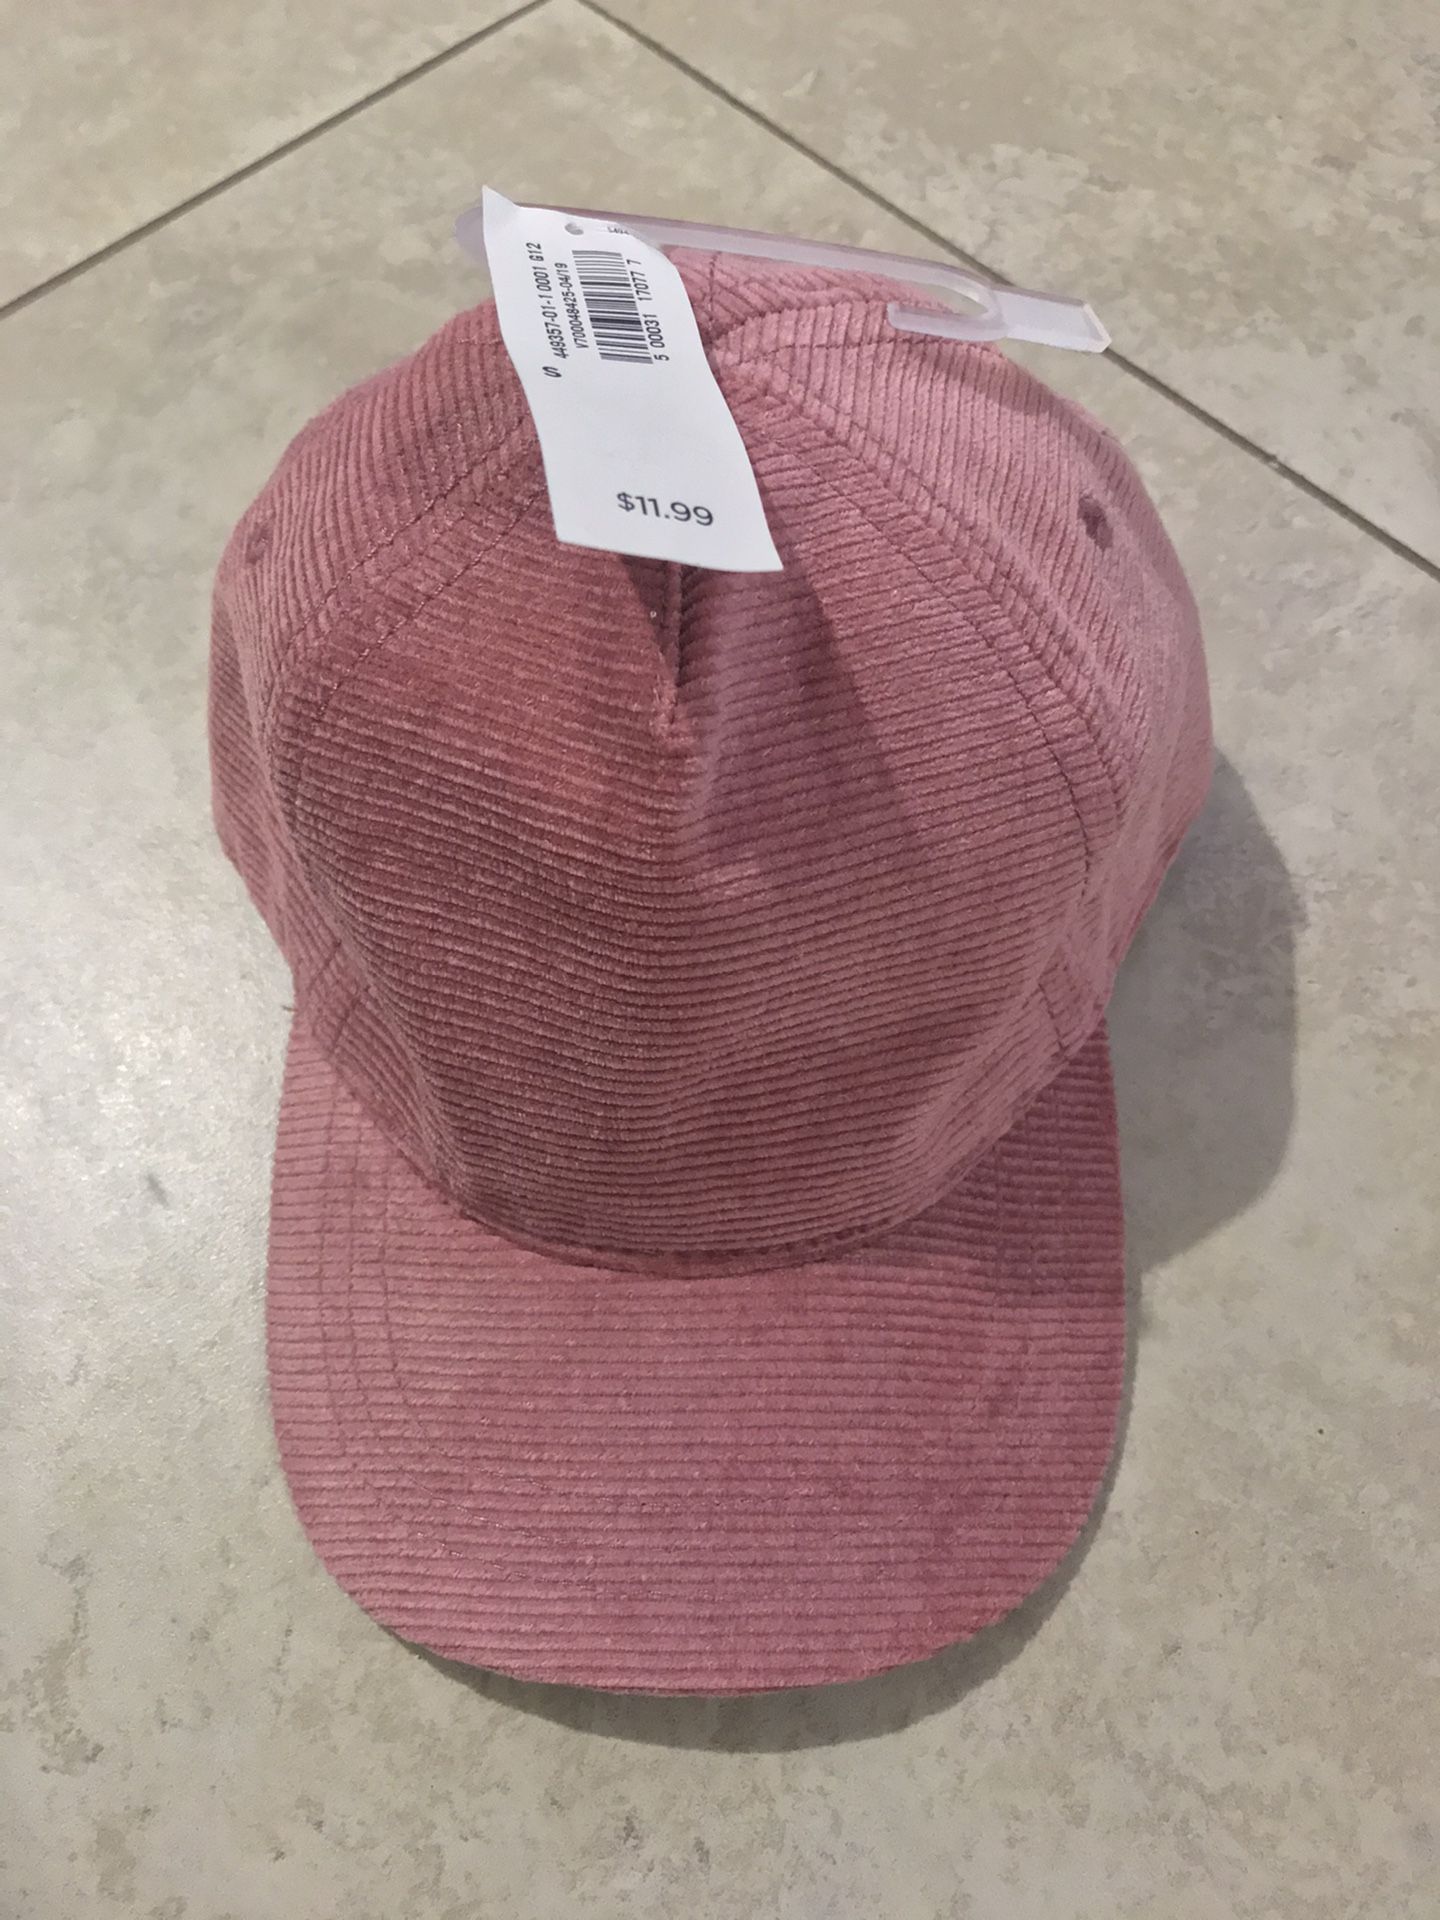 Old Navy Toddler Girl’s Corduroy Pink Baseball Hat, Size Small